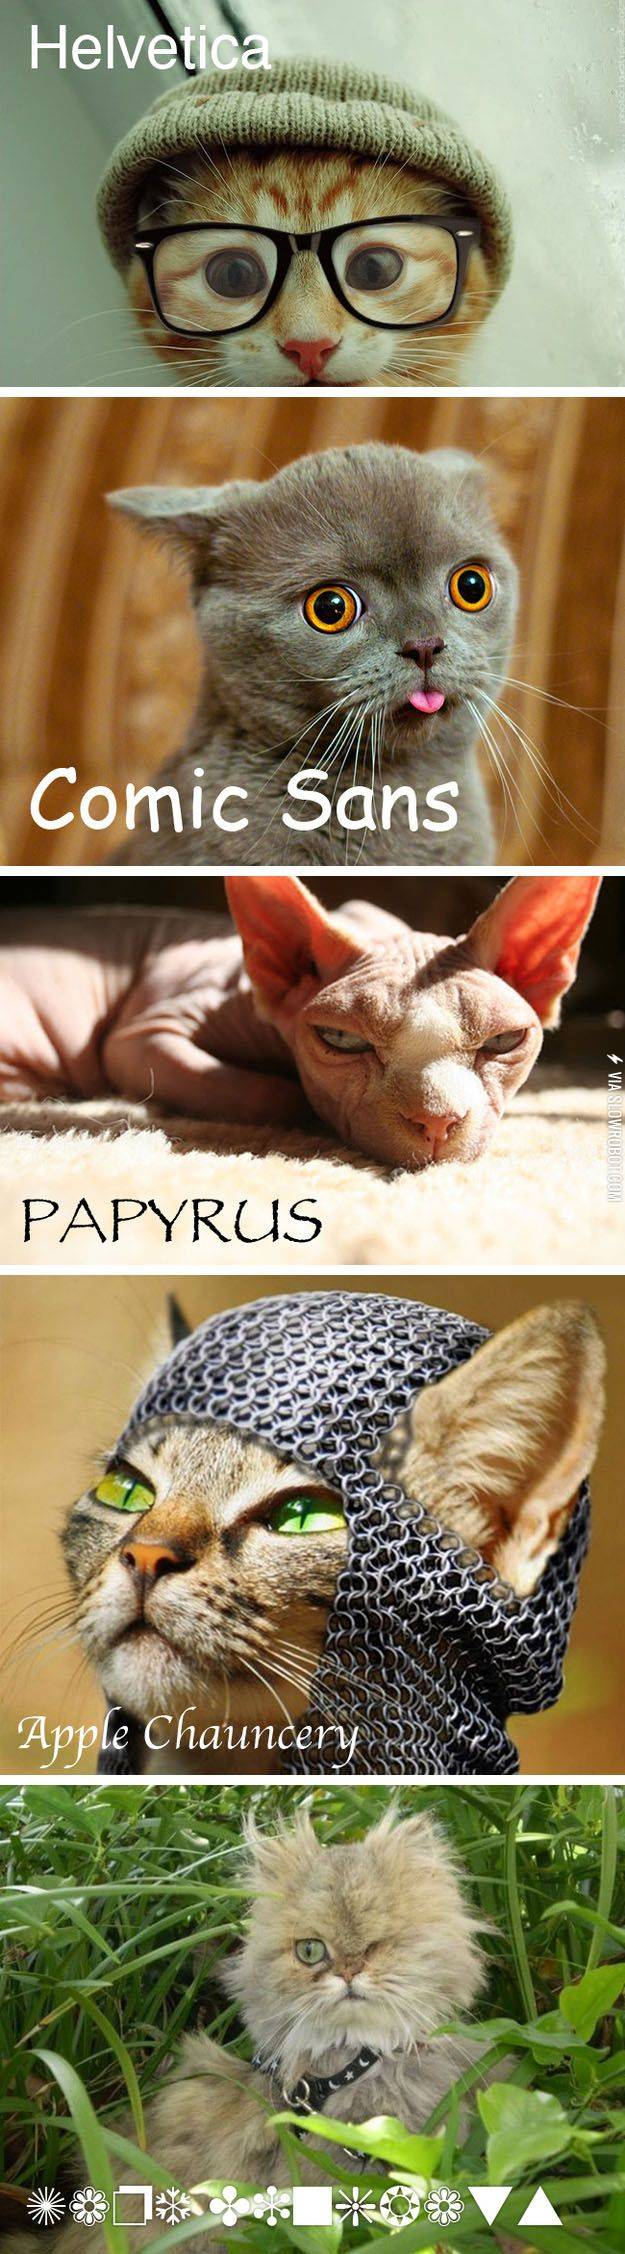 Cats+as+fonts.